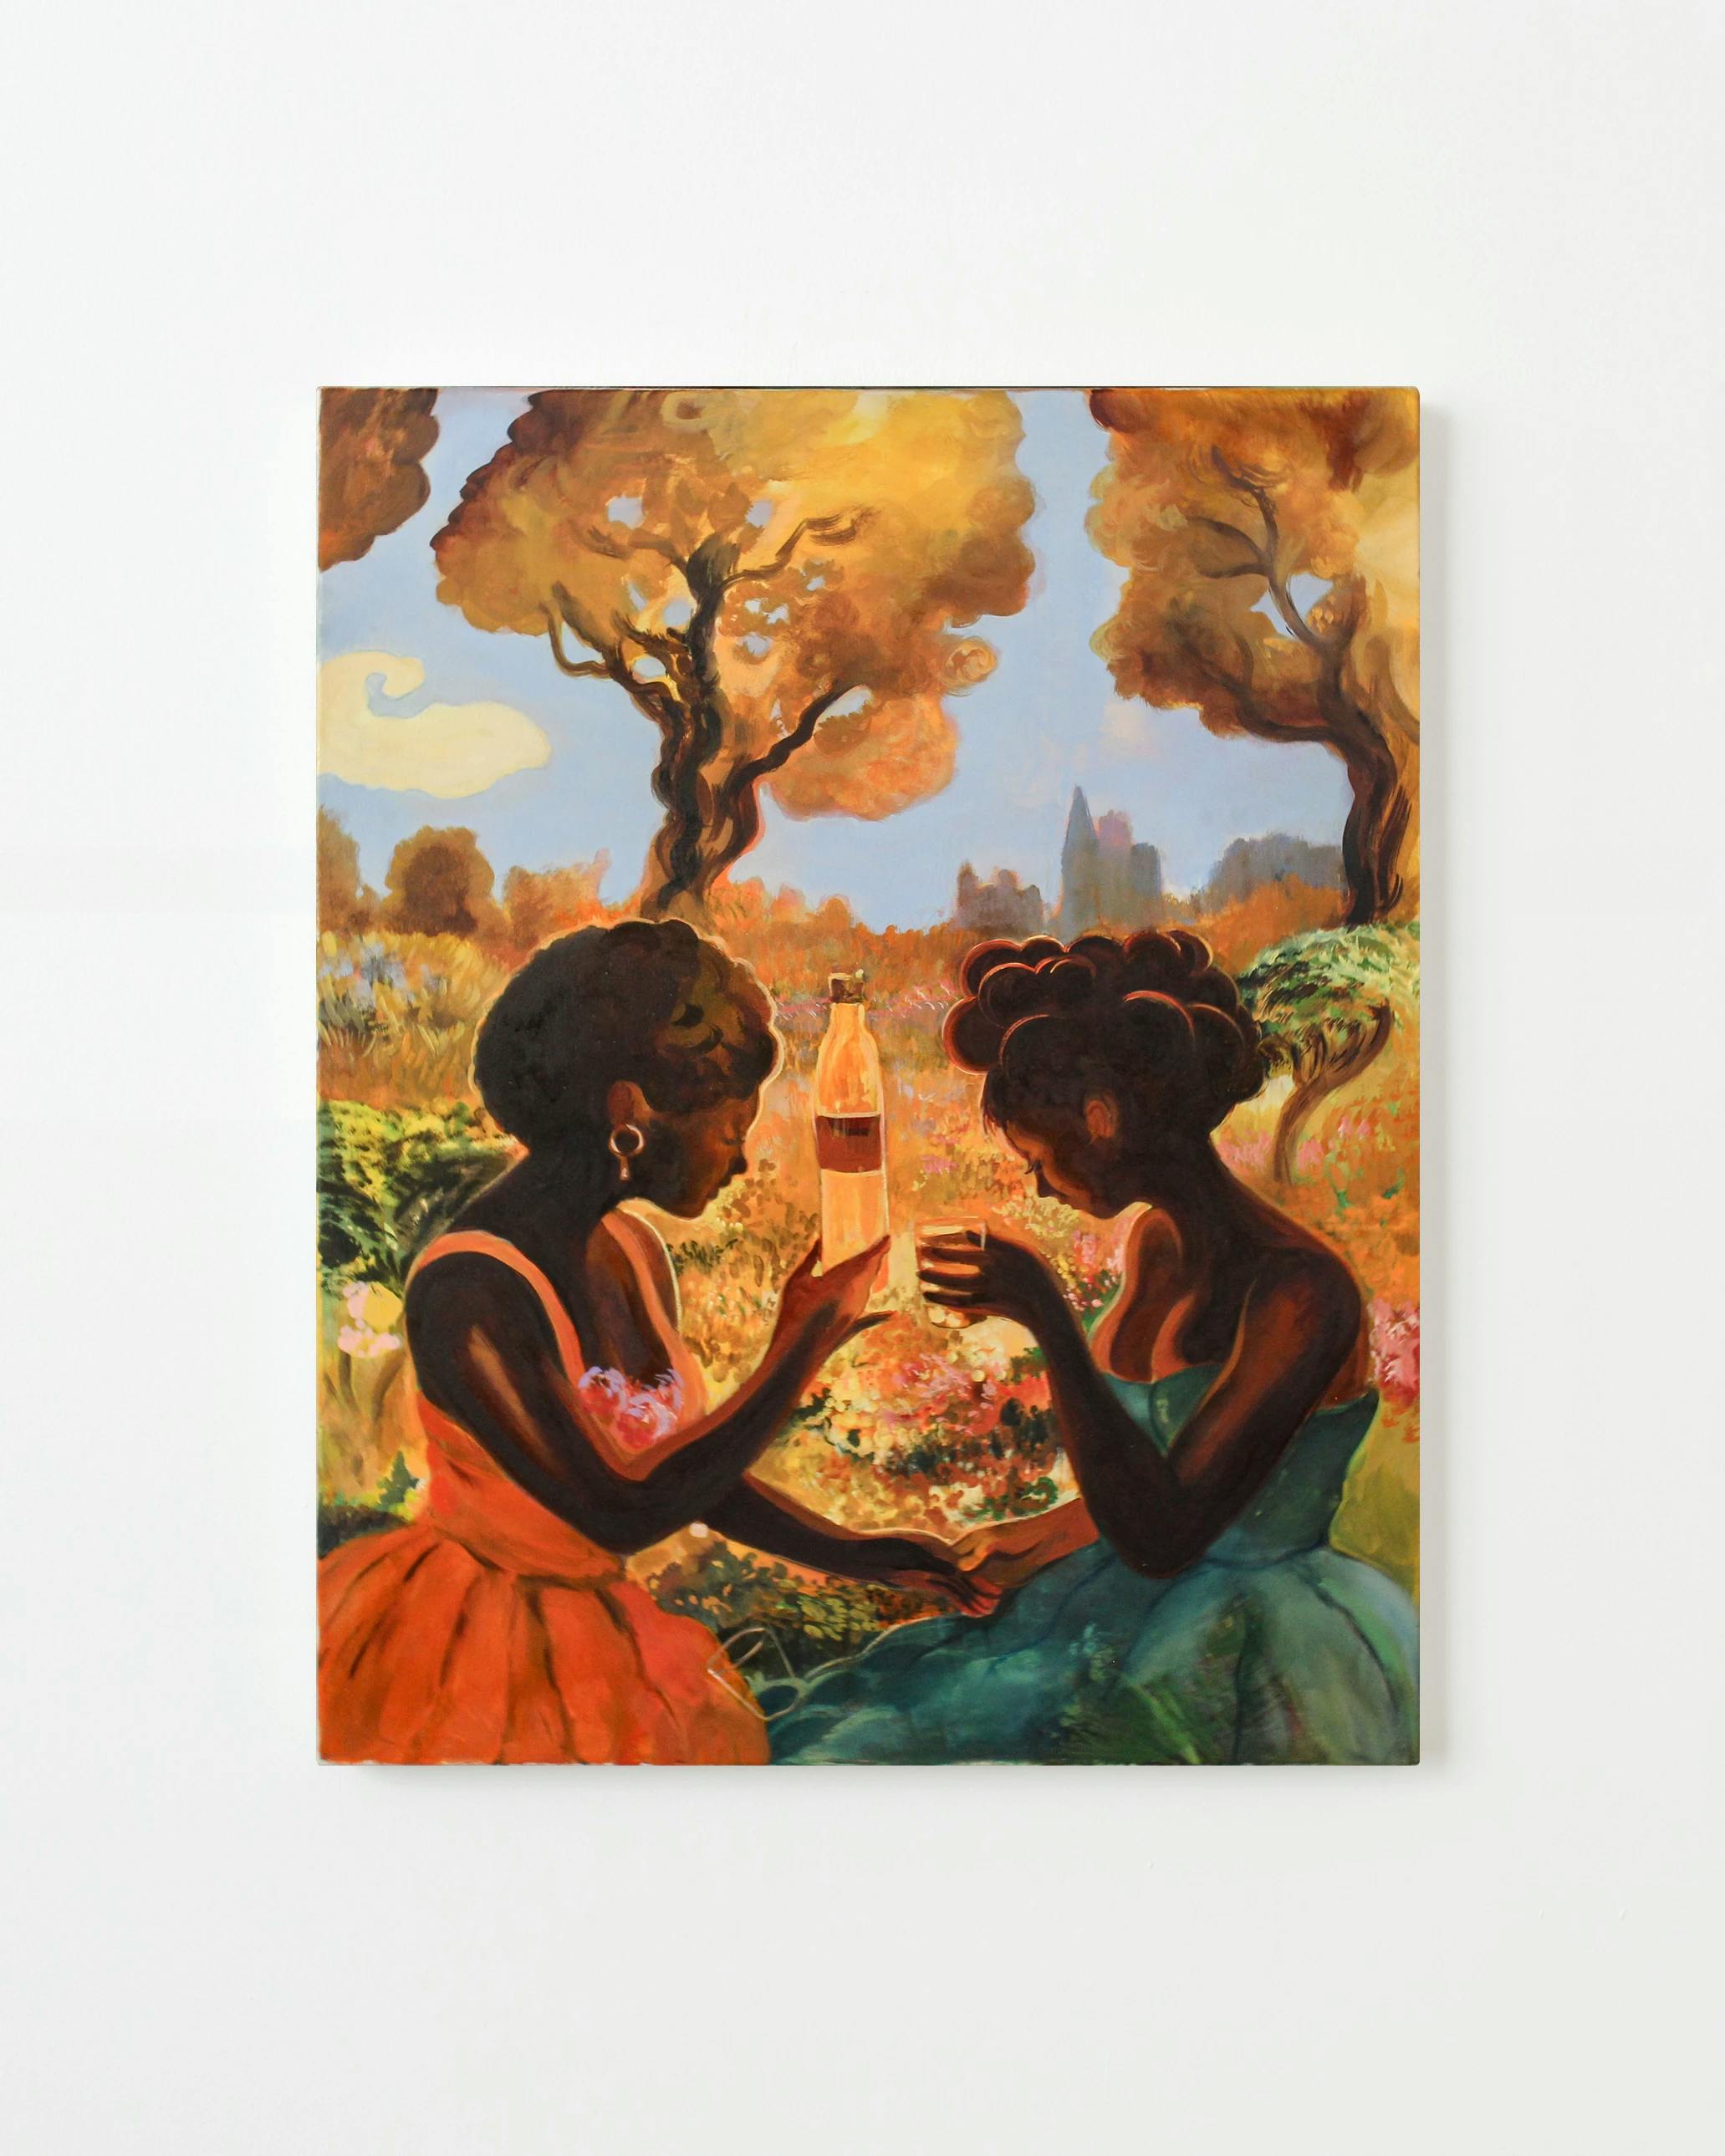 A figurative painting by artist Nefertiti Jenkins of two women in dresses sharing a drink while sitting in a field of golden orange trees.